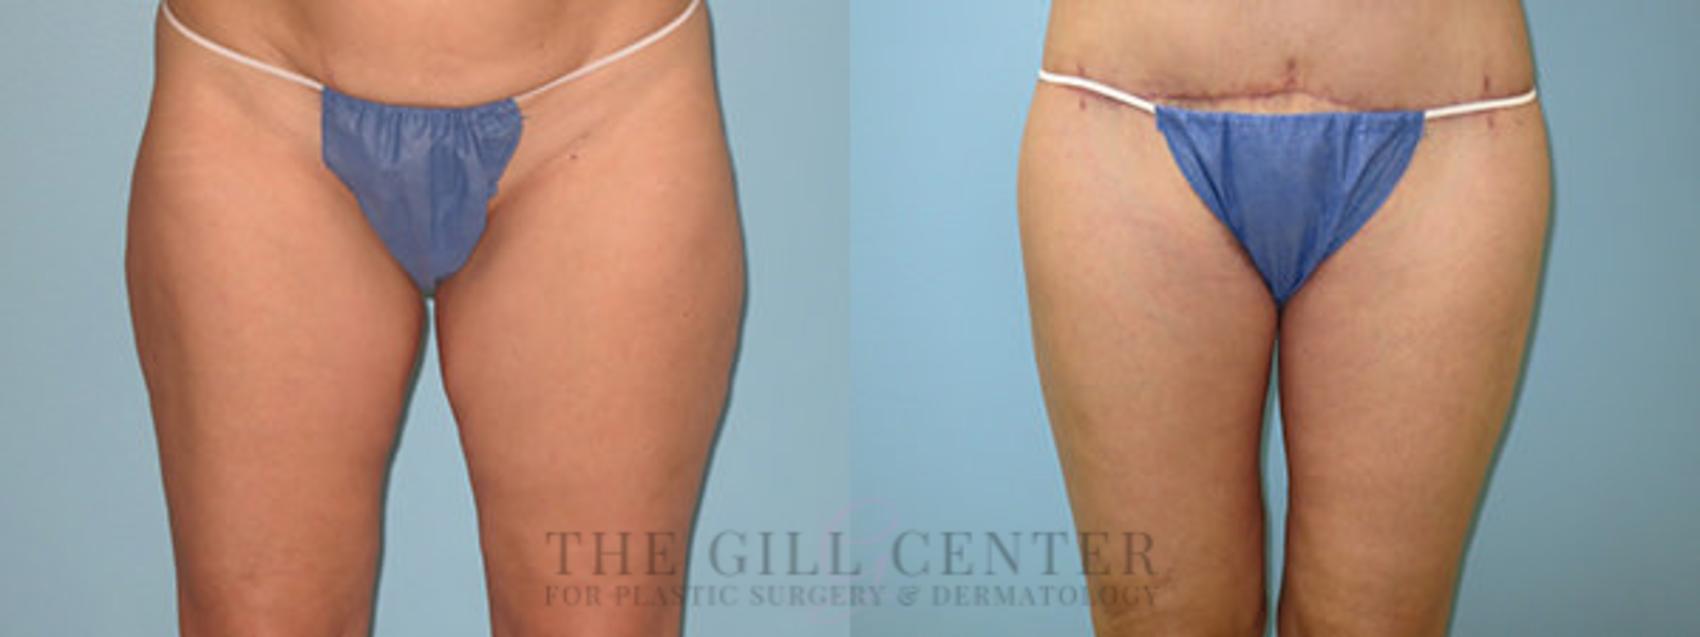 Thigh Lift Case 164 Before & After Front | The Woodlands, TX | The Gill Center for Plastic Surgery and Dermatology